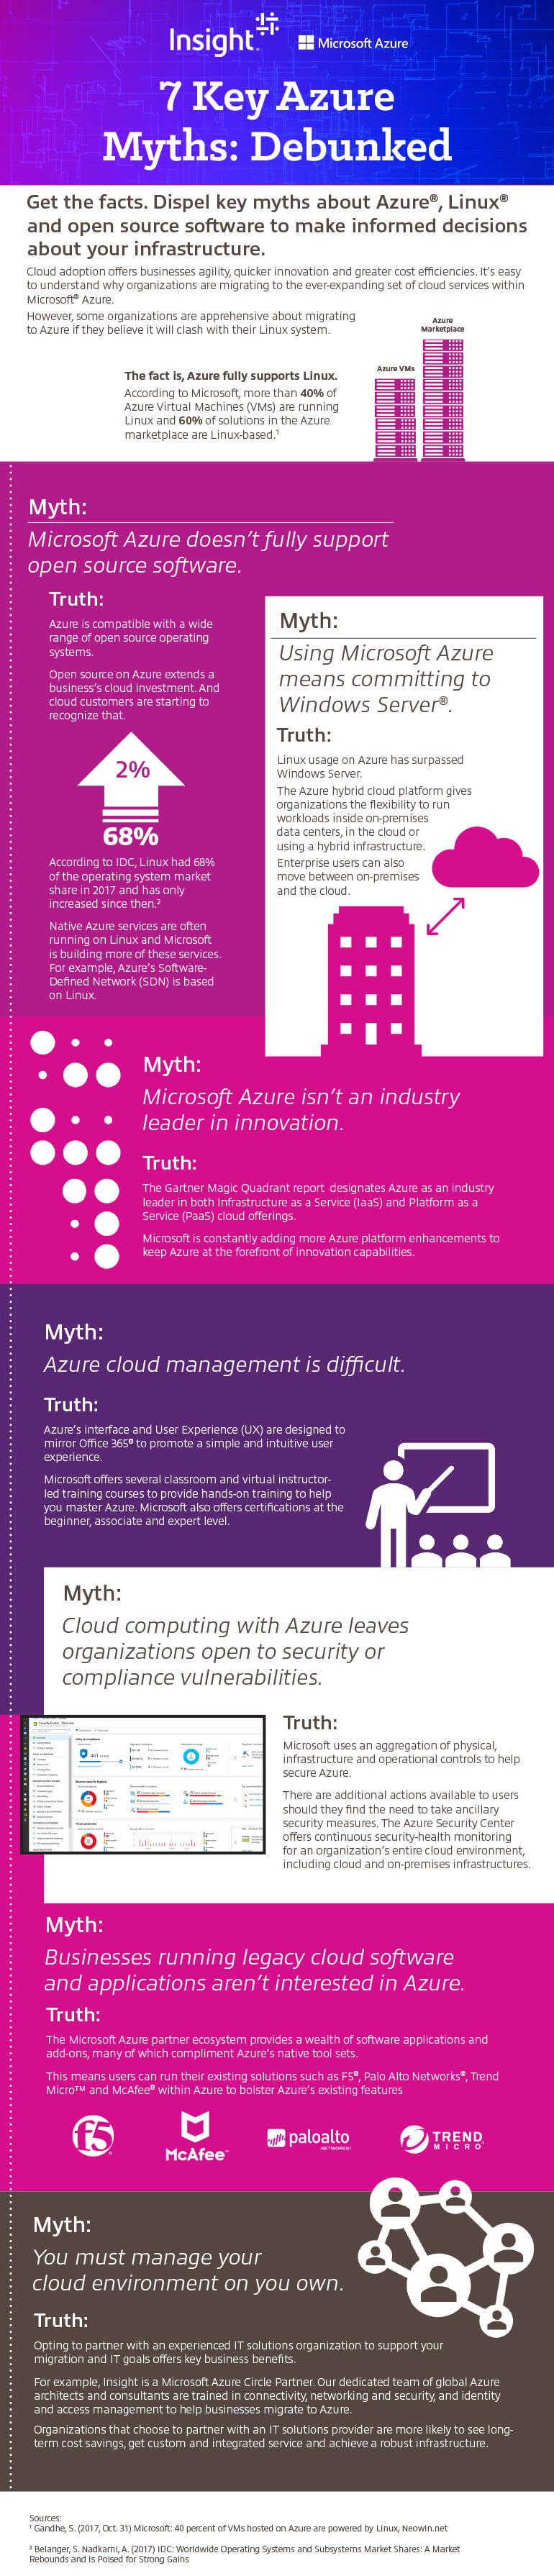 Infographic displaying Insight Dispelling Microsoft Azure Myths